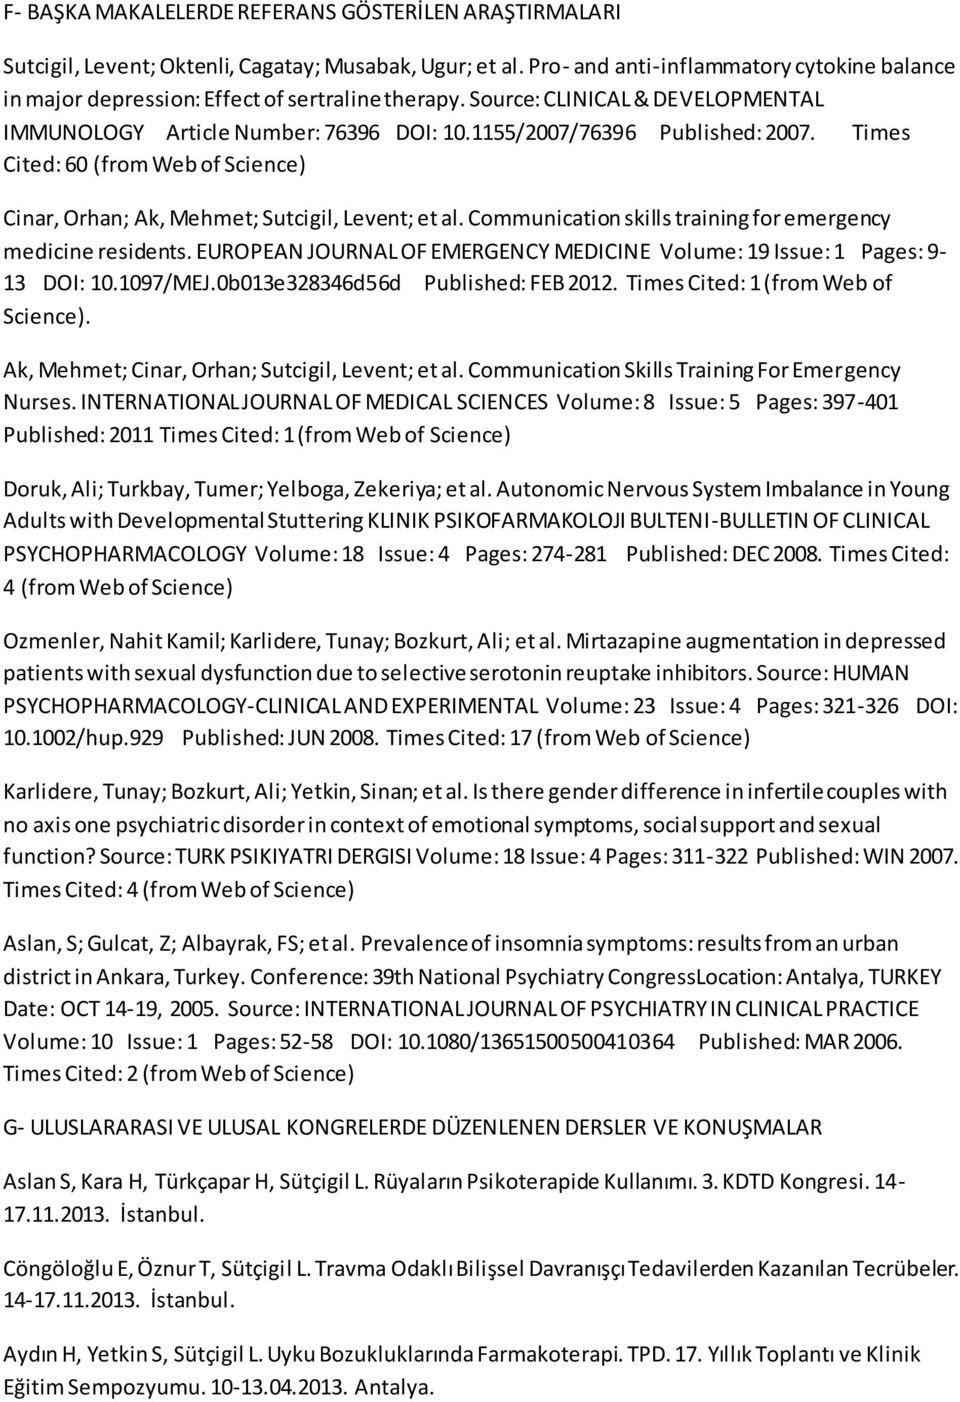 1155/2007/76396 Published: 2007. Times Cited: 60 (from Web of Science) Cinar, Orhan; Ak, Mehmet; Sutcigil, Levent; et al. Communication skills training for emergency medicine residents.